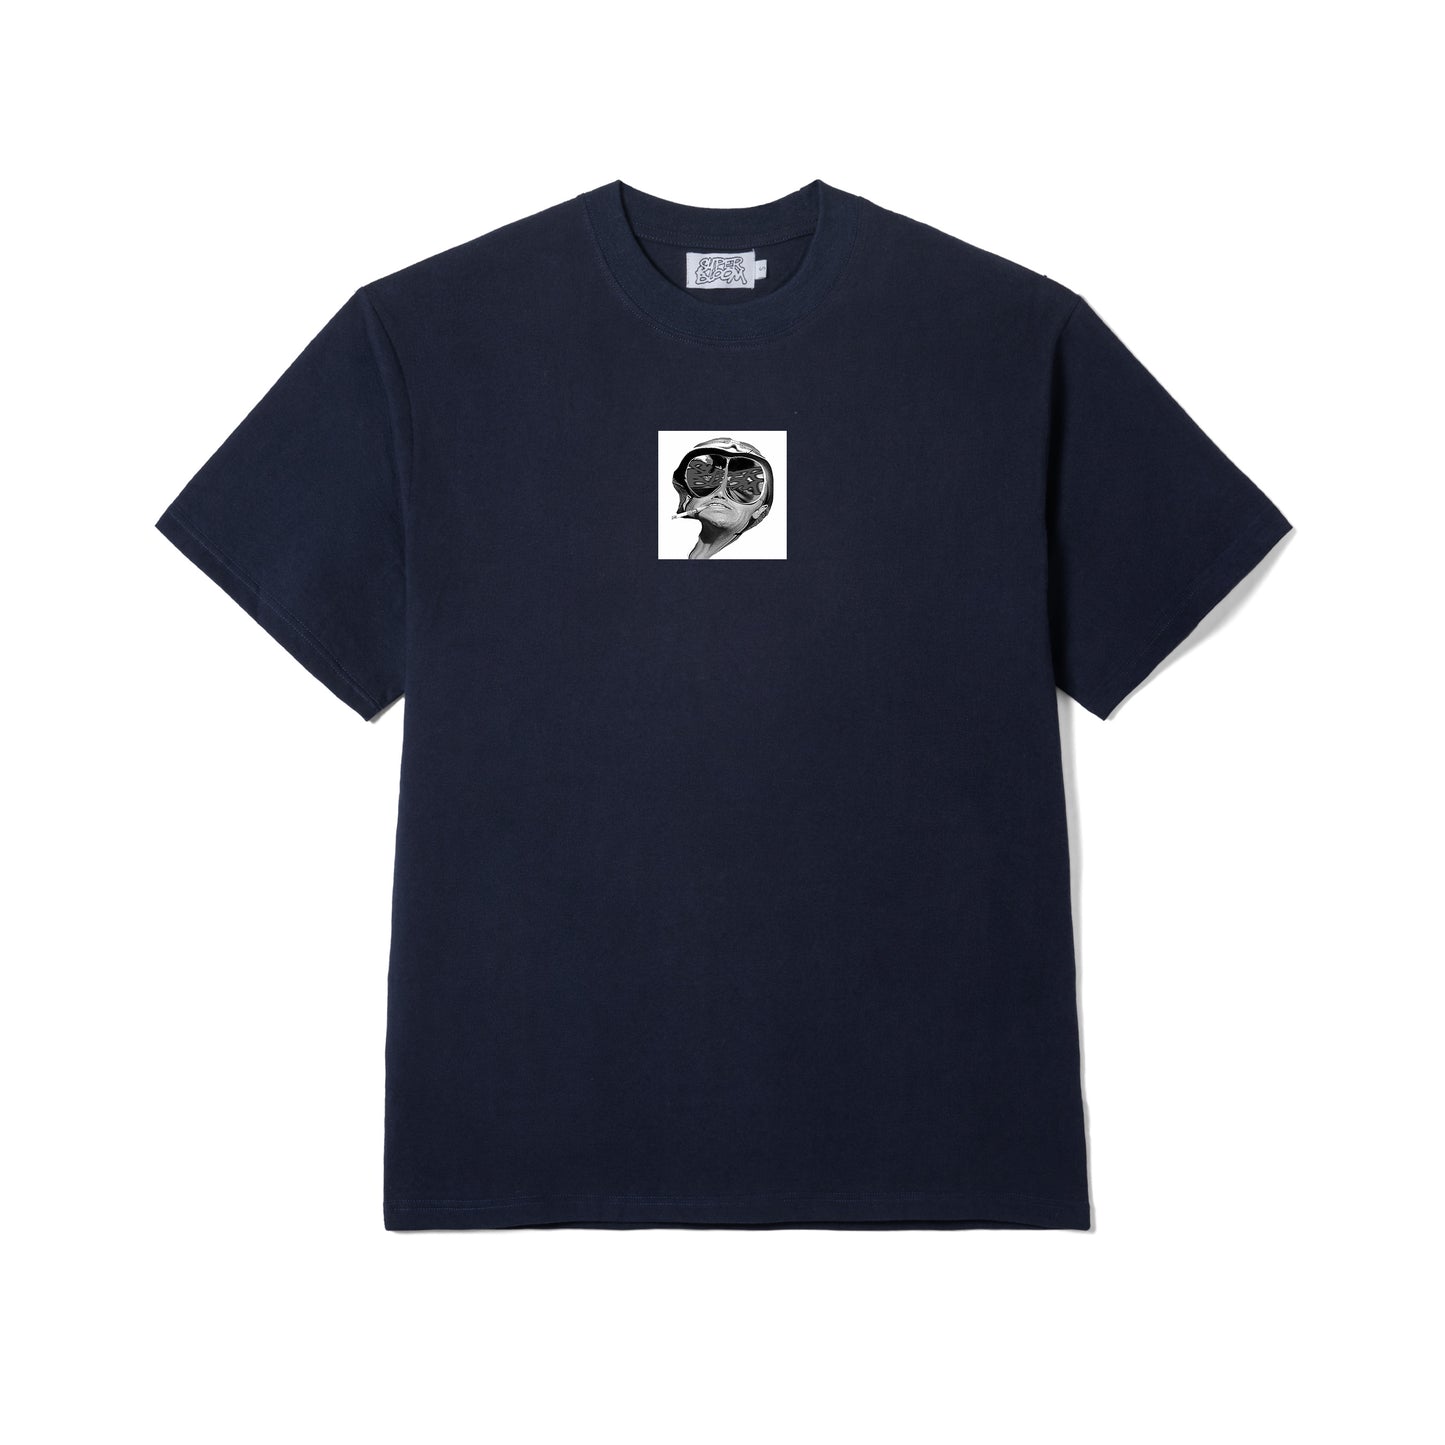 TAKE THE RIDE SS TEE IN NAVY